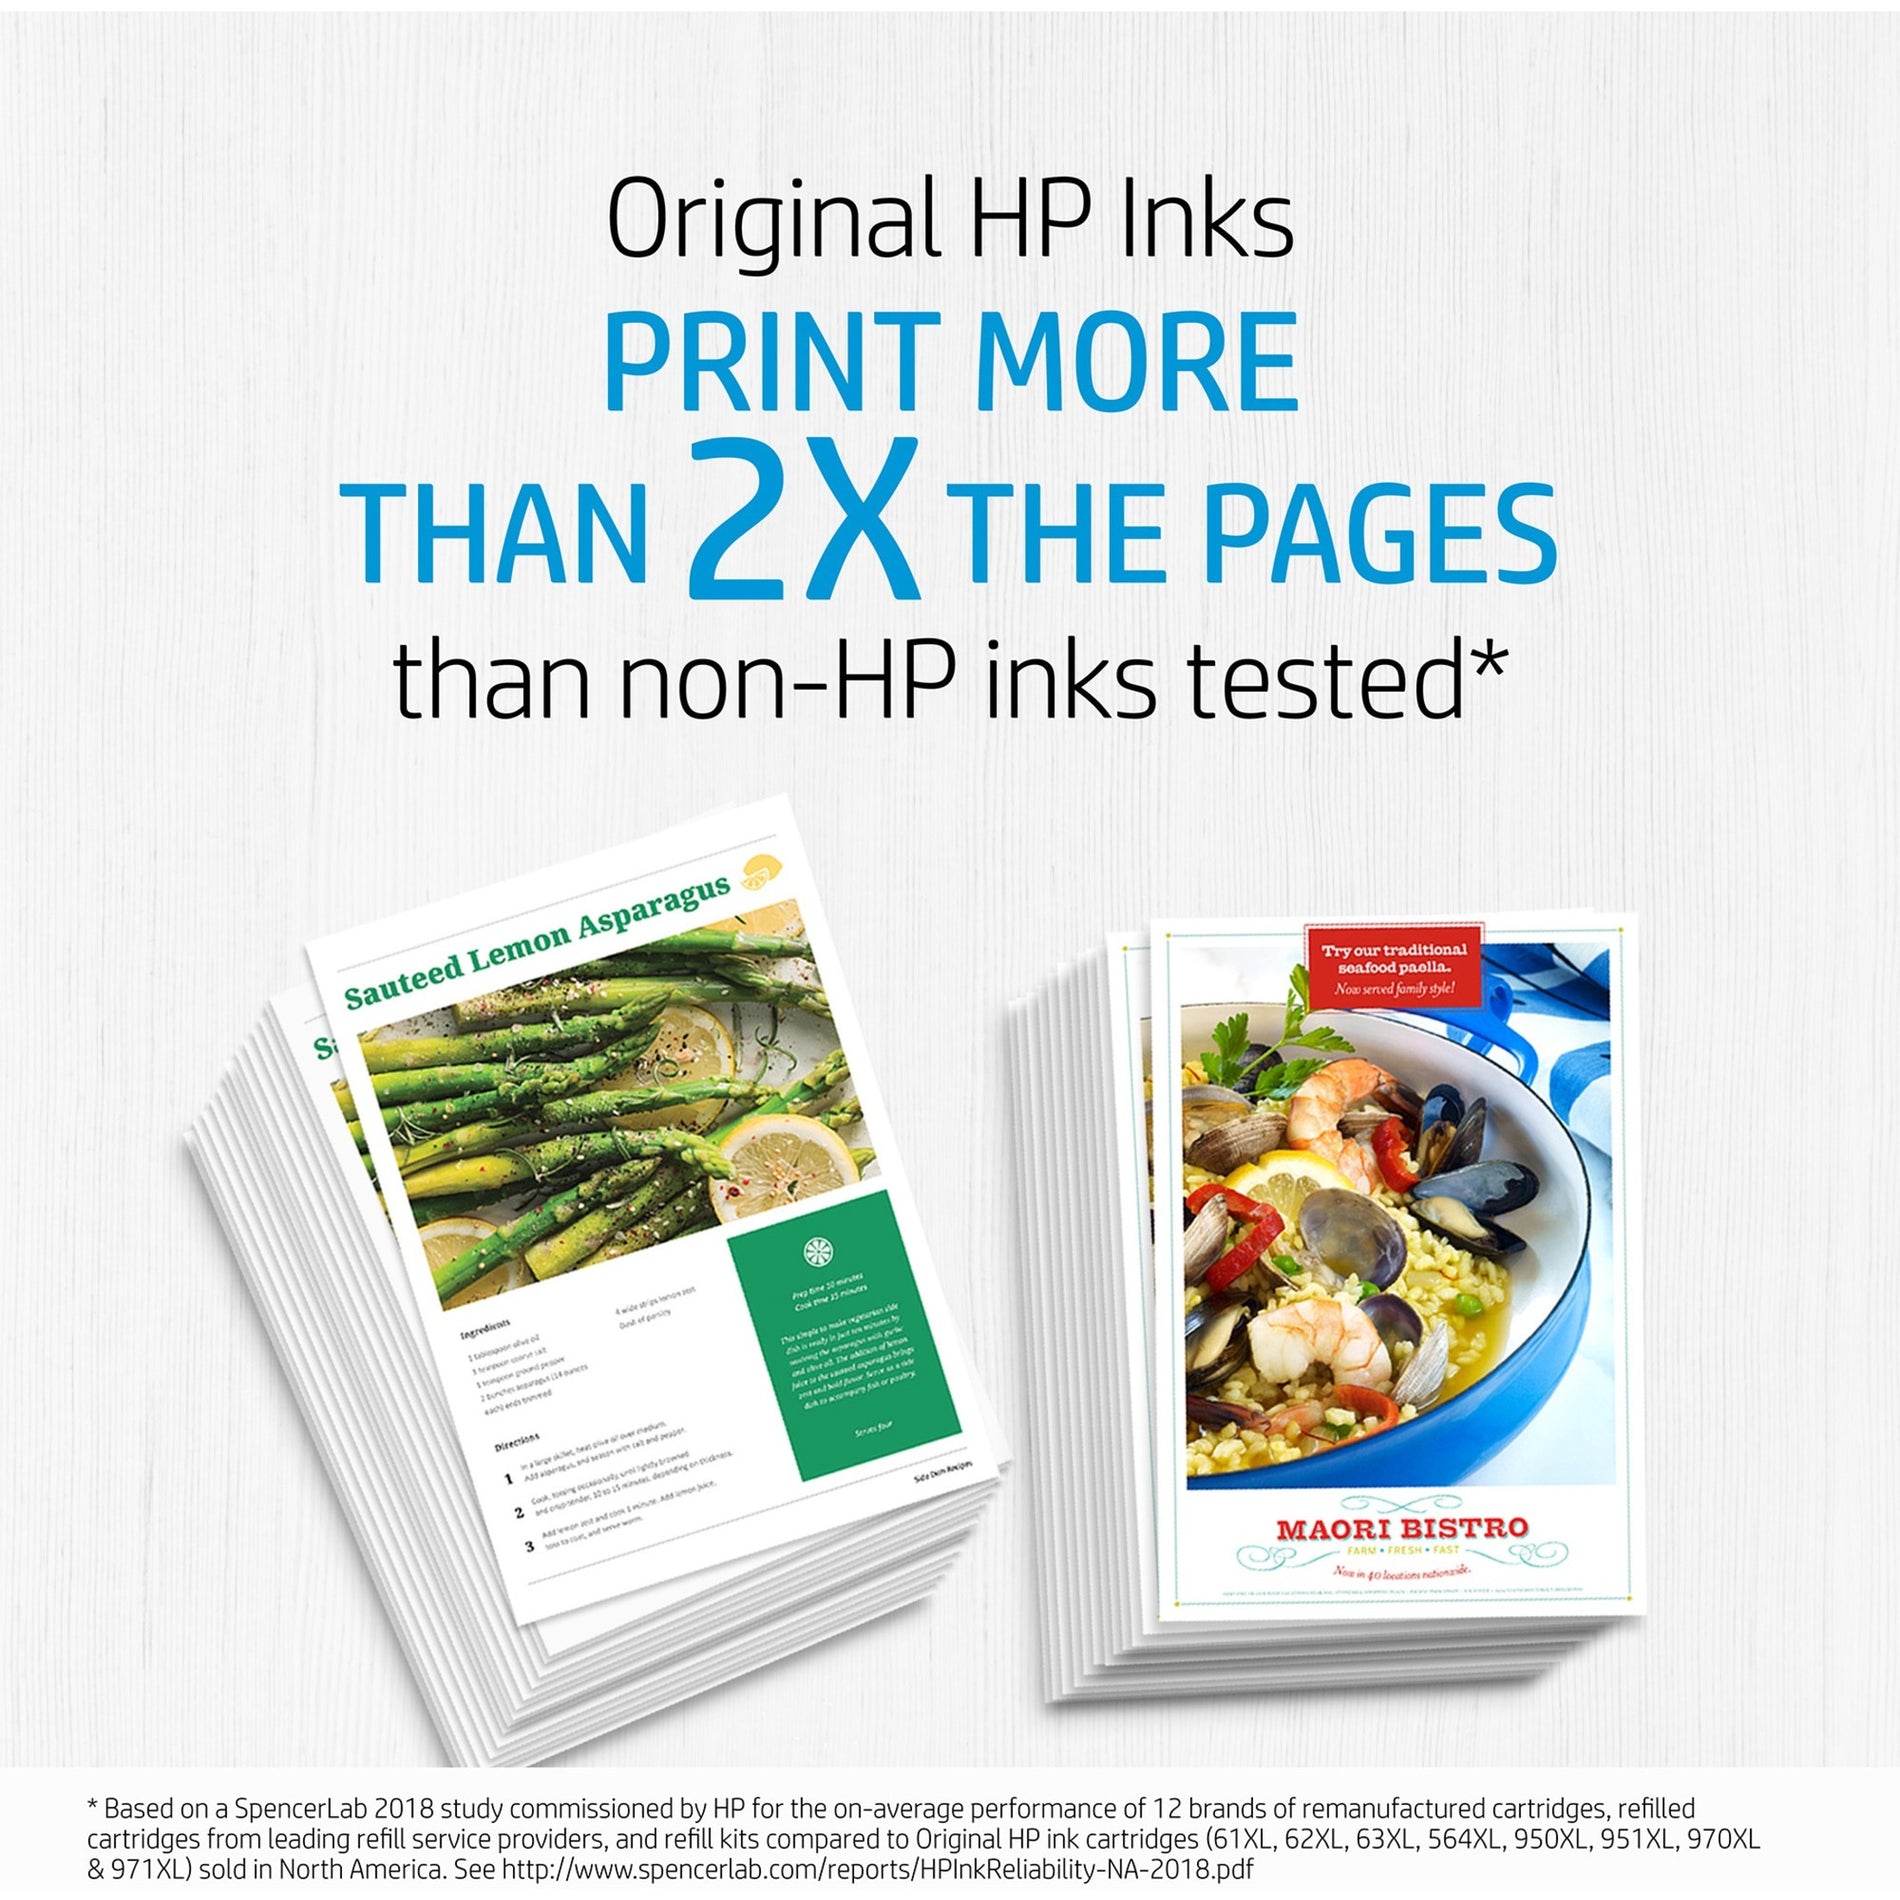 HP 3YP00AN 962 Standard Yield Ink Cartridge Pack, Cyan, Yellow, Magenta, 700 Pages